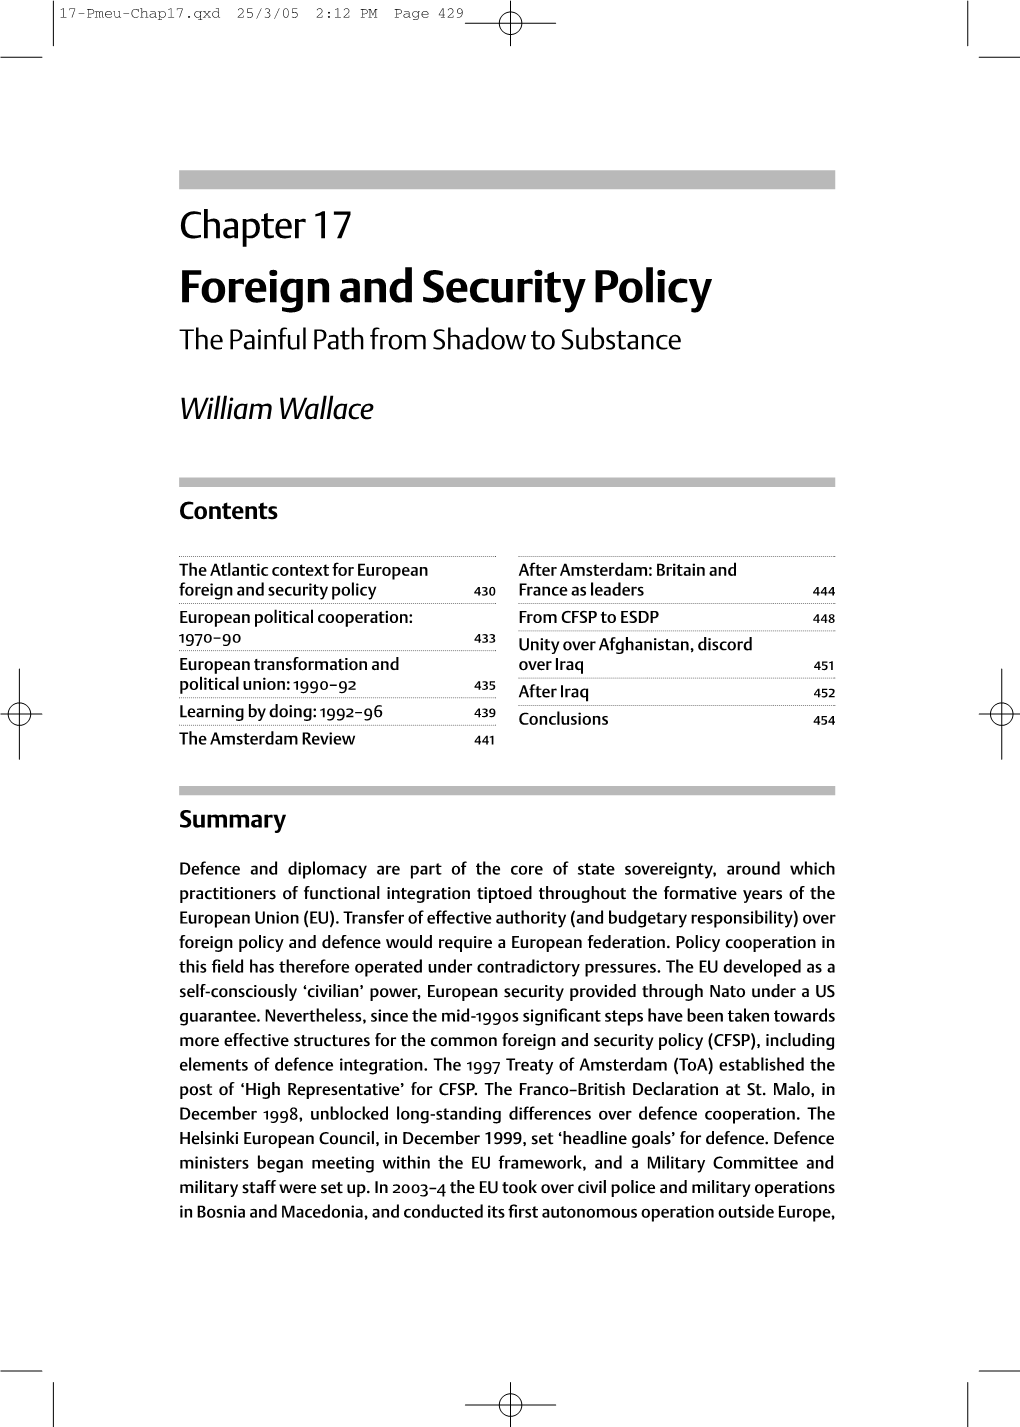 Foreign and Security Policy the Painful Path from Shadow to Substance